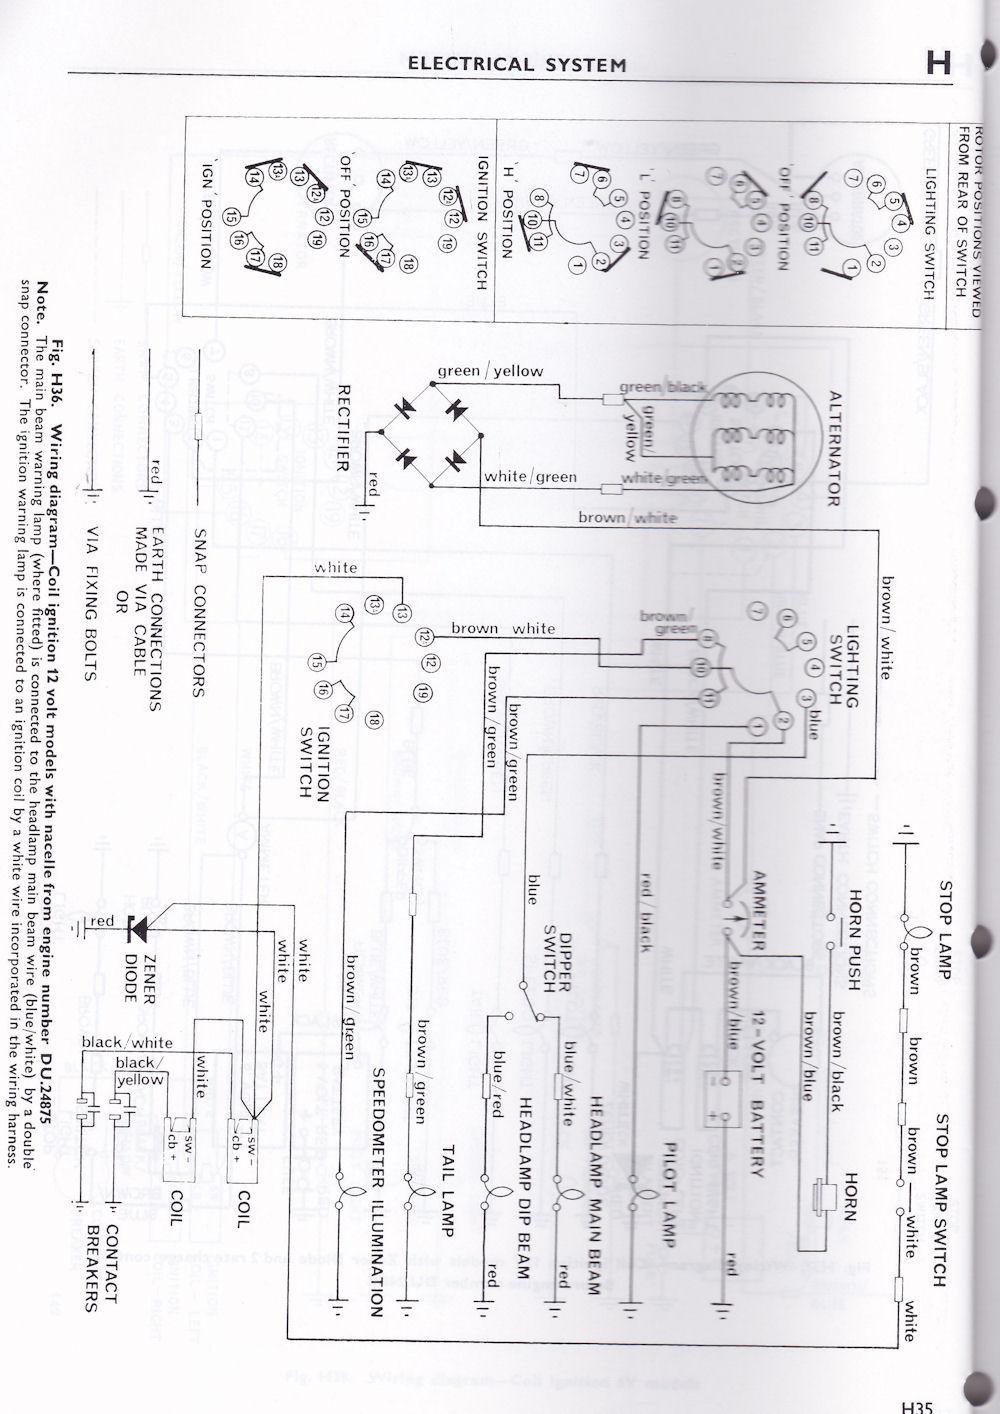 Tr6 Wiring Diagram from www.vintage-motorcycle.com